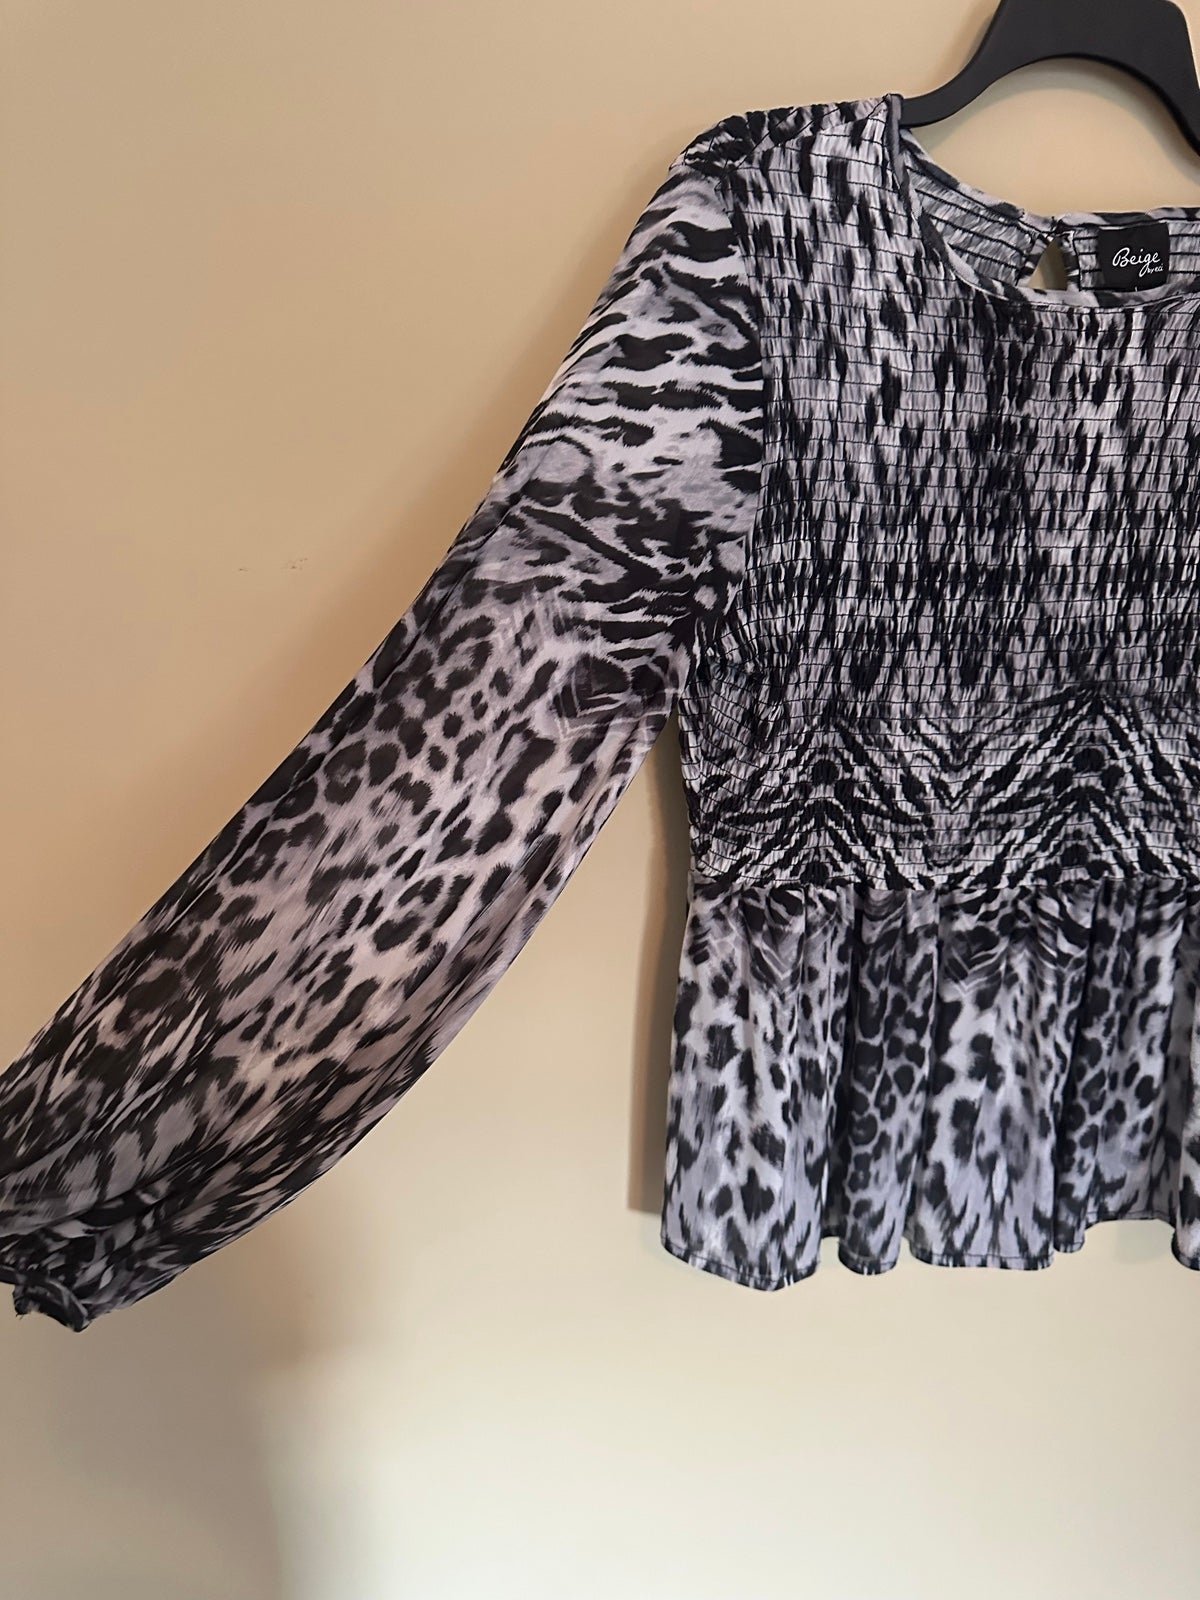 the Lowest price NWT Blouse IzrcLPBWt Low Price